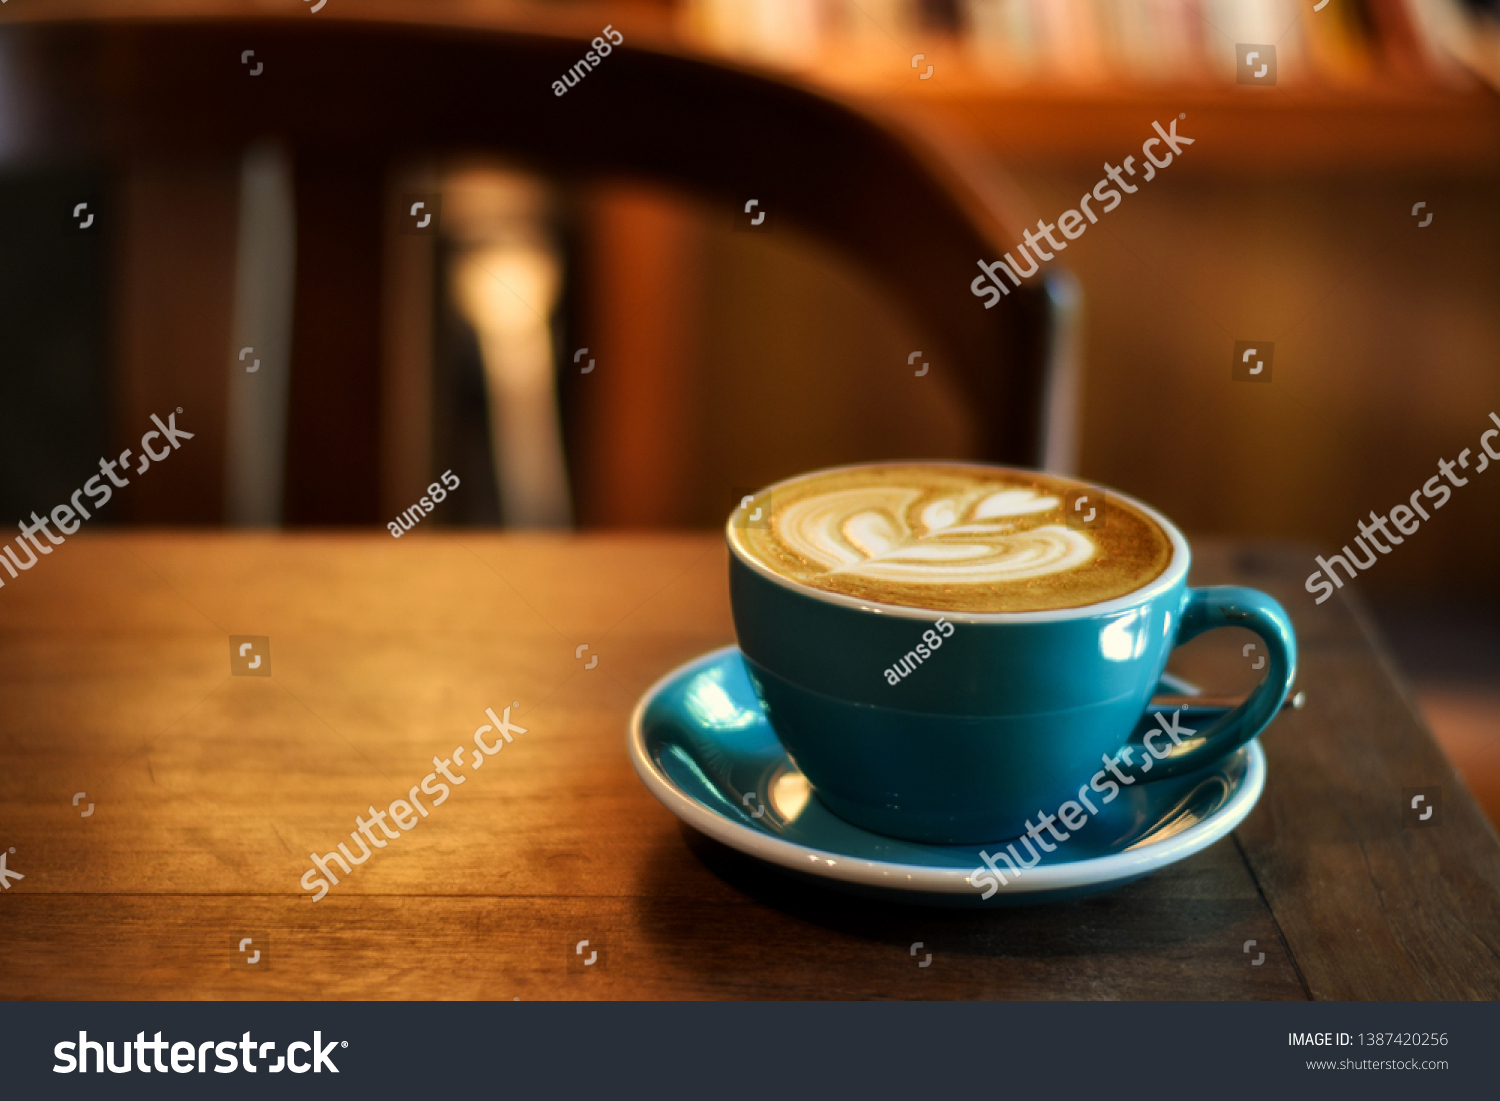 Coffee in blue cup on wooden table in cafe with lighting background #1387420256